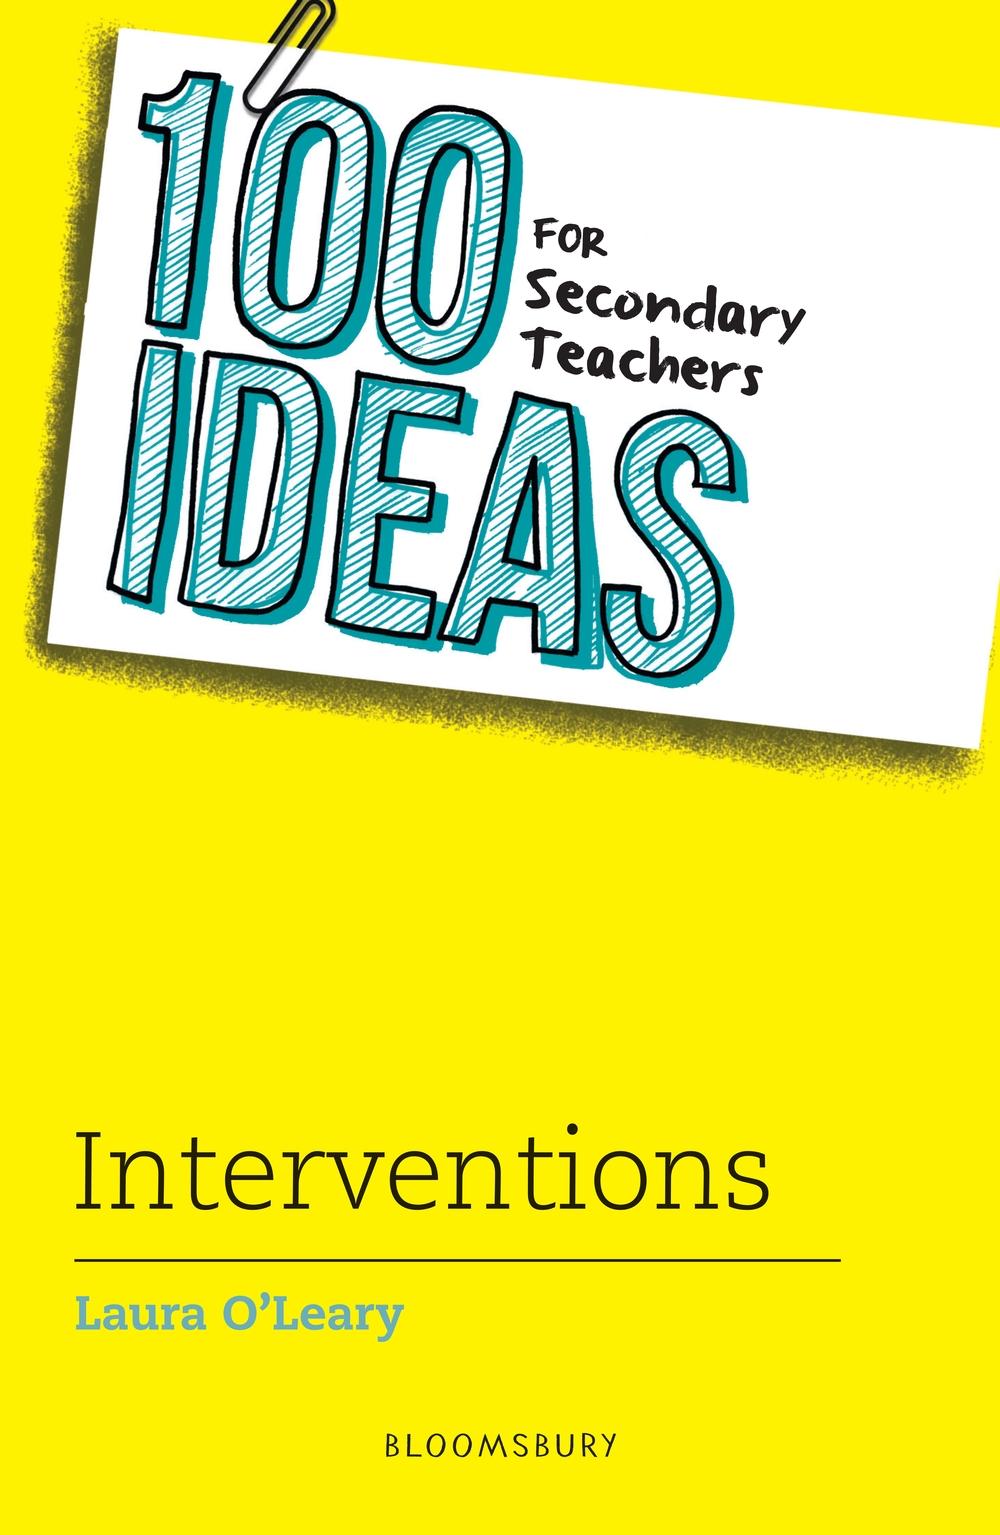 100 Ideas for Secondary Teachers: Interventions - Laura O'Leary